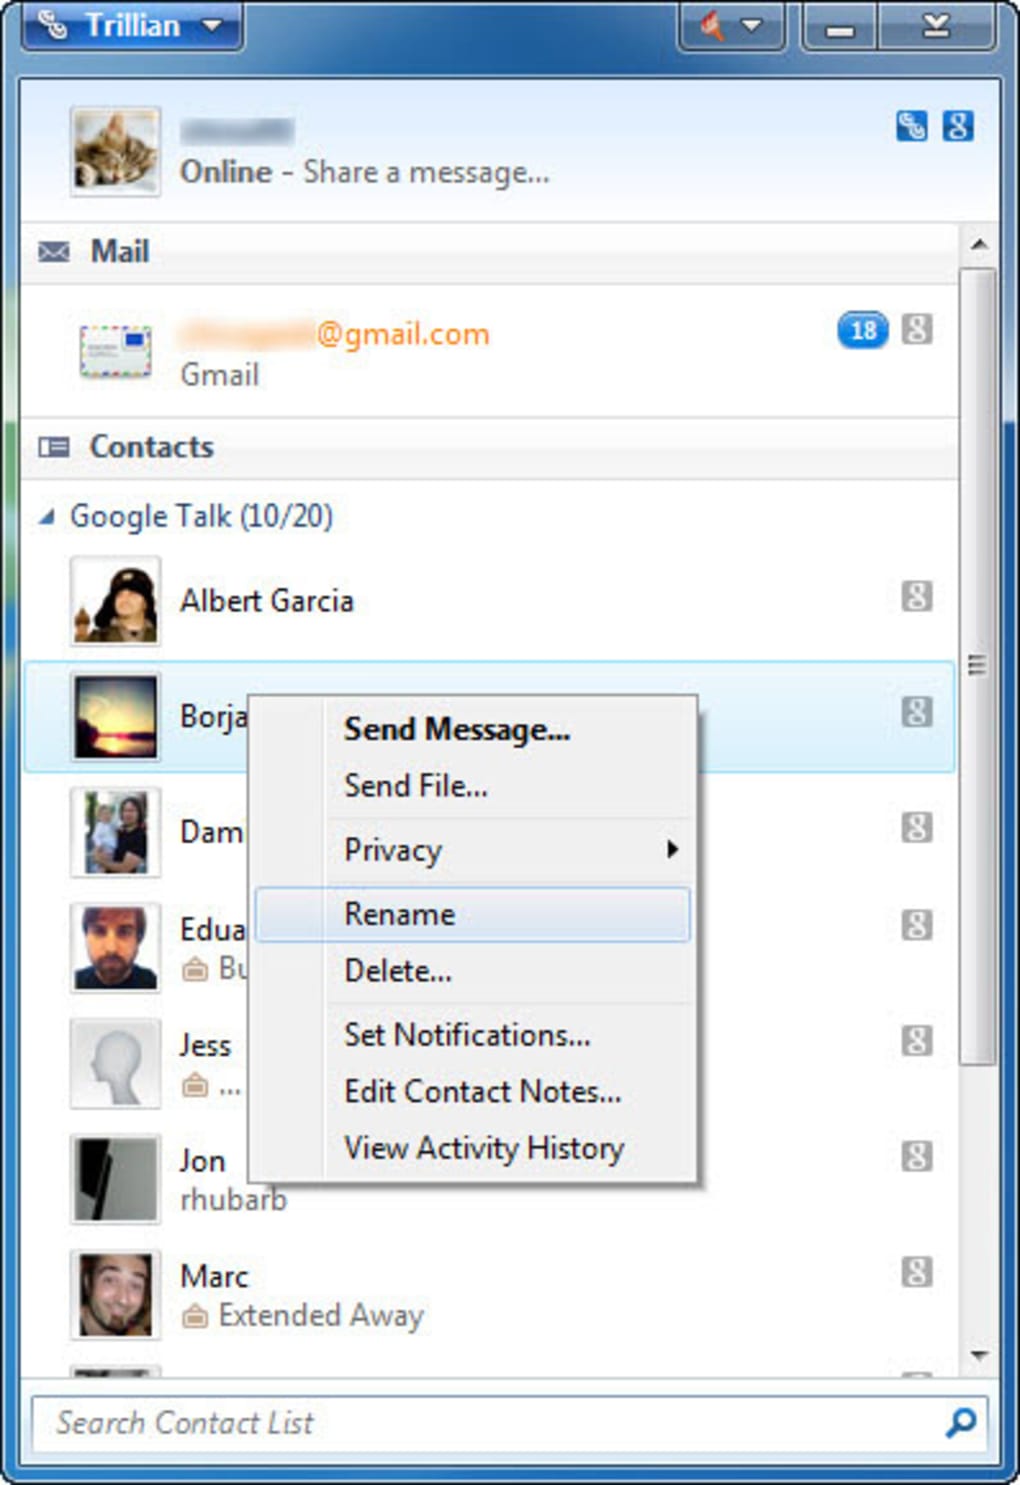 trillian chat software